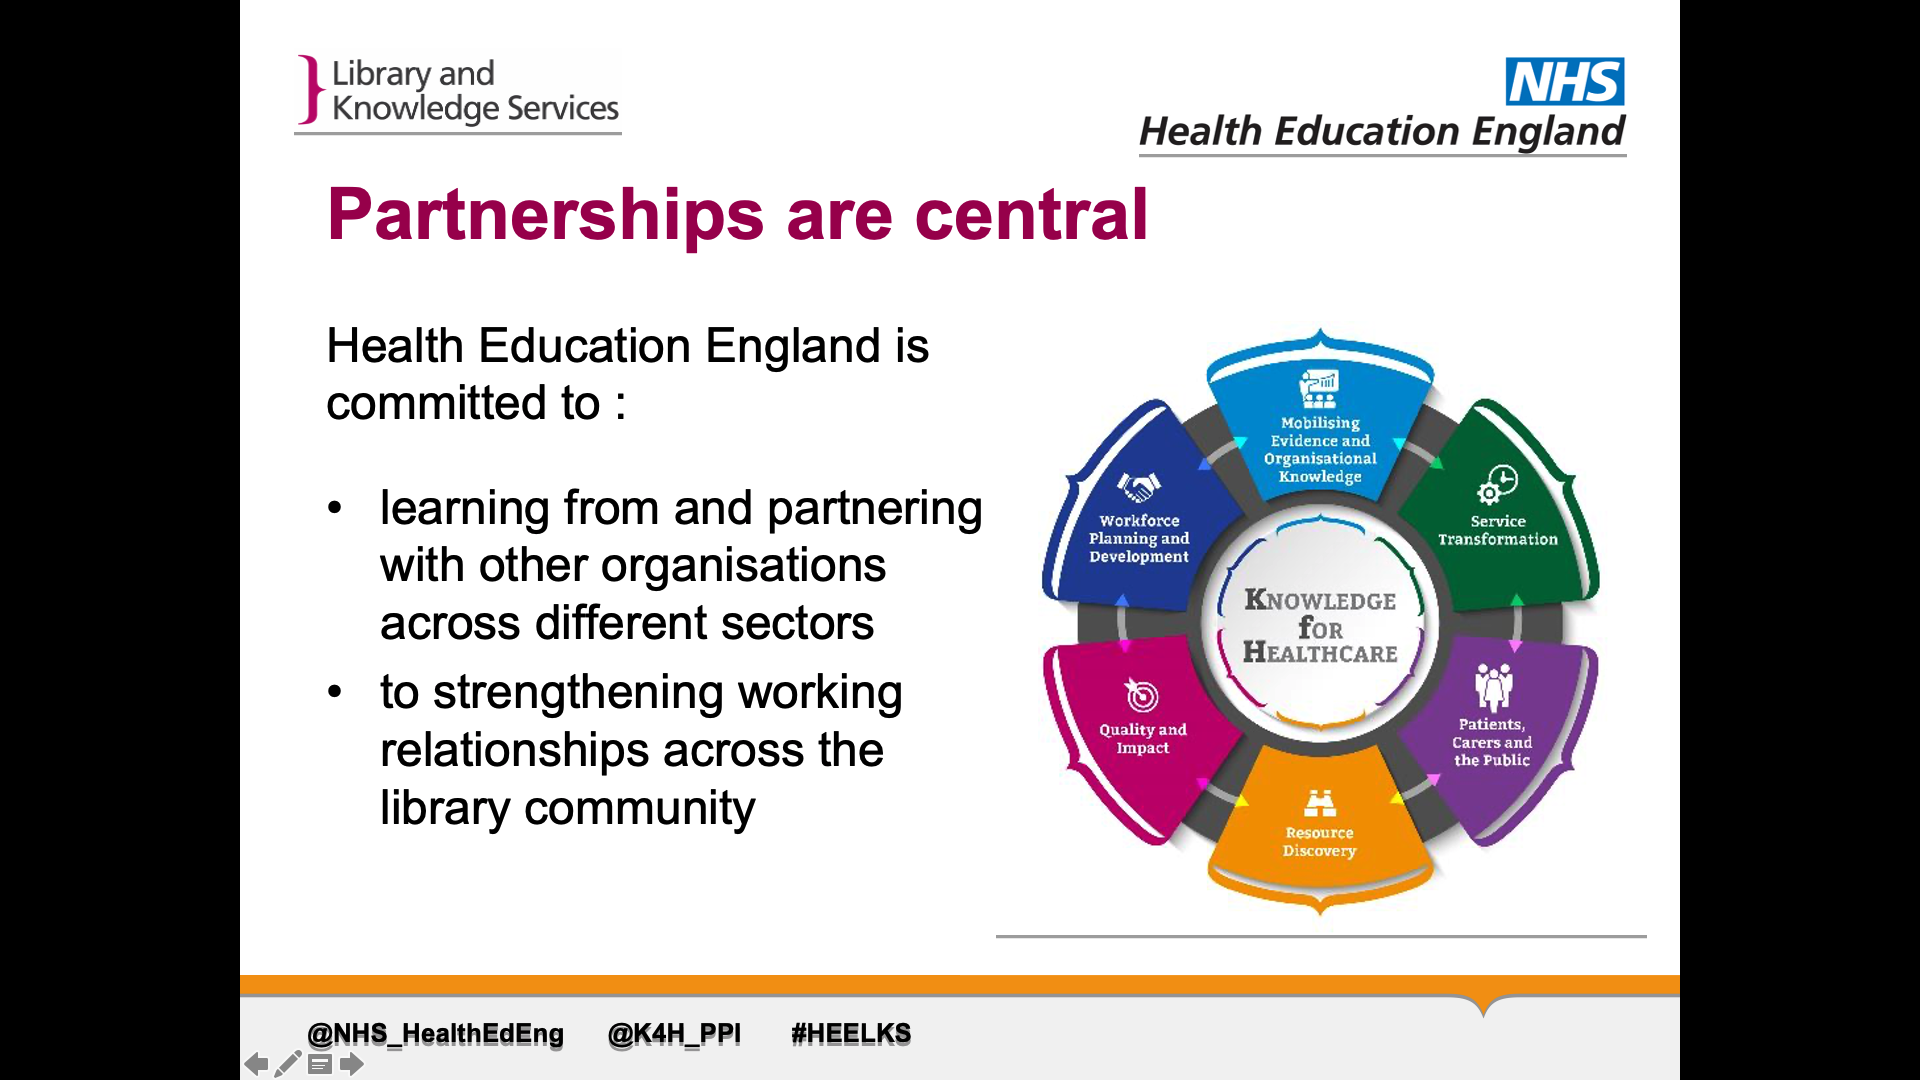 Title: Partnerships are central. Text on page: Health Education England is committed to: 1. learning from and partnering with other organisations across different sectors 2 to strengthening working relationships across the library community. Image alongside Knowledge for healthcare flower diagram. Knowledge for healthcare is in the middle with each petal of the flower labelled with different KfH priorities. Petals called: 'mobilising evidence and organisational knowledge', 'service transformation', 'patients, carers, and the public', 'resource discovery', 'quality and impact', and 'workforce planning and development'